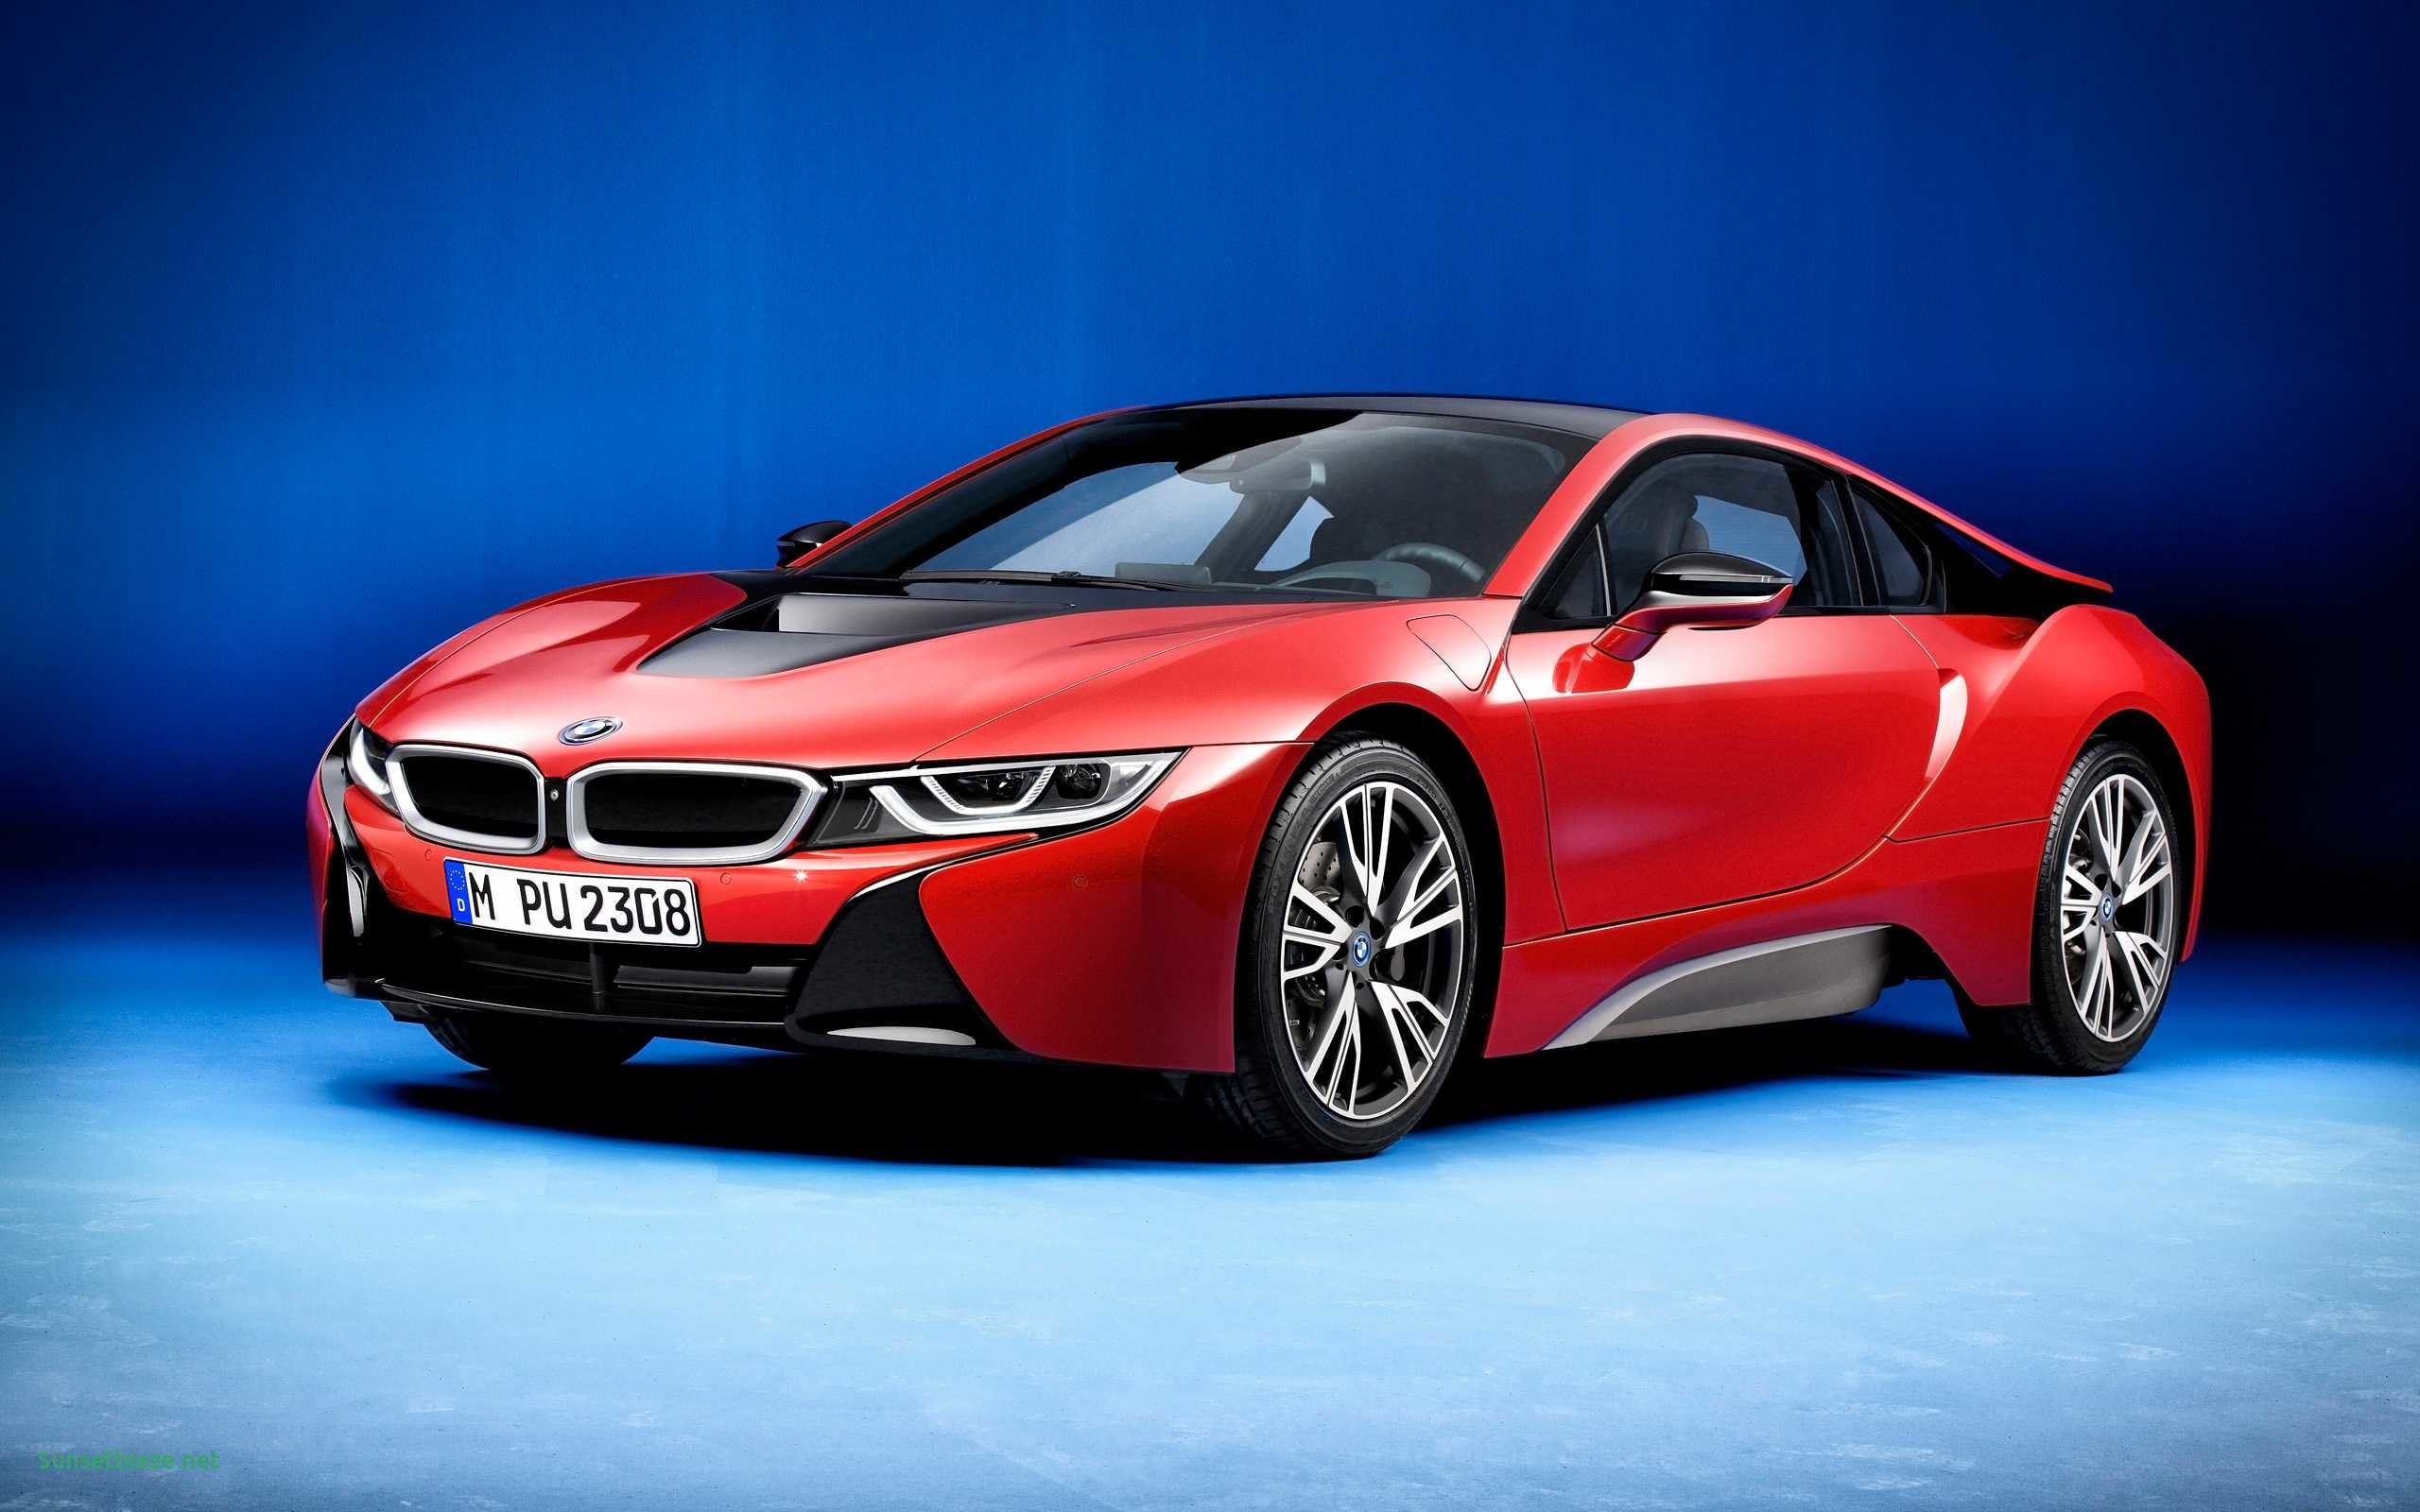 2560x1600 Bmw I8 Wallpaper 4k 30 Images On Genchifo New Of Bmw Concept Car Wallpaper  Hd